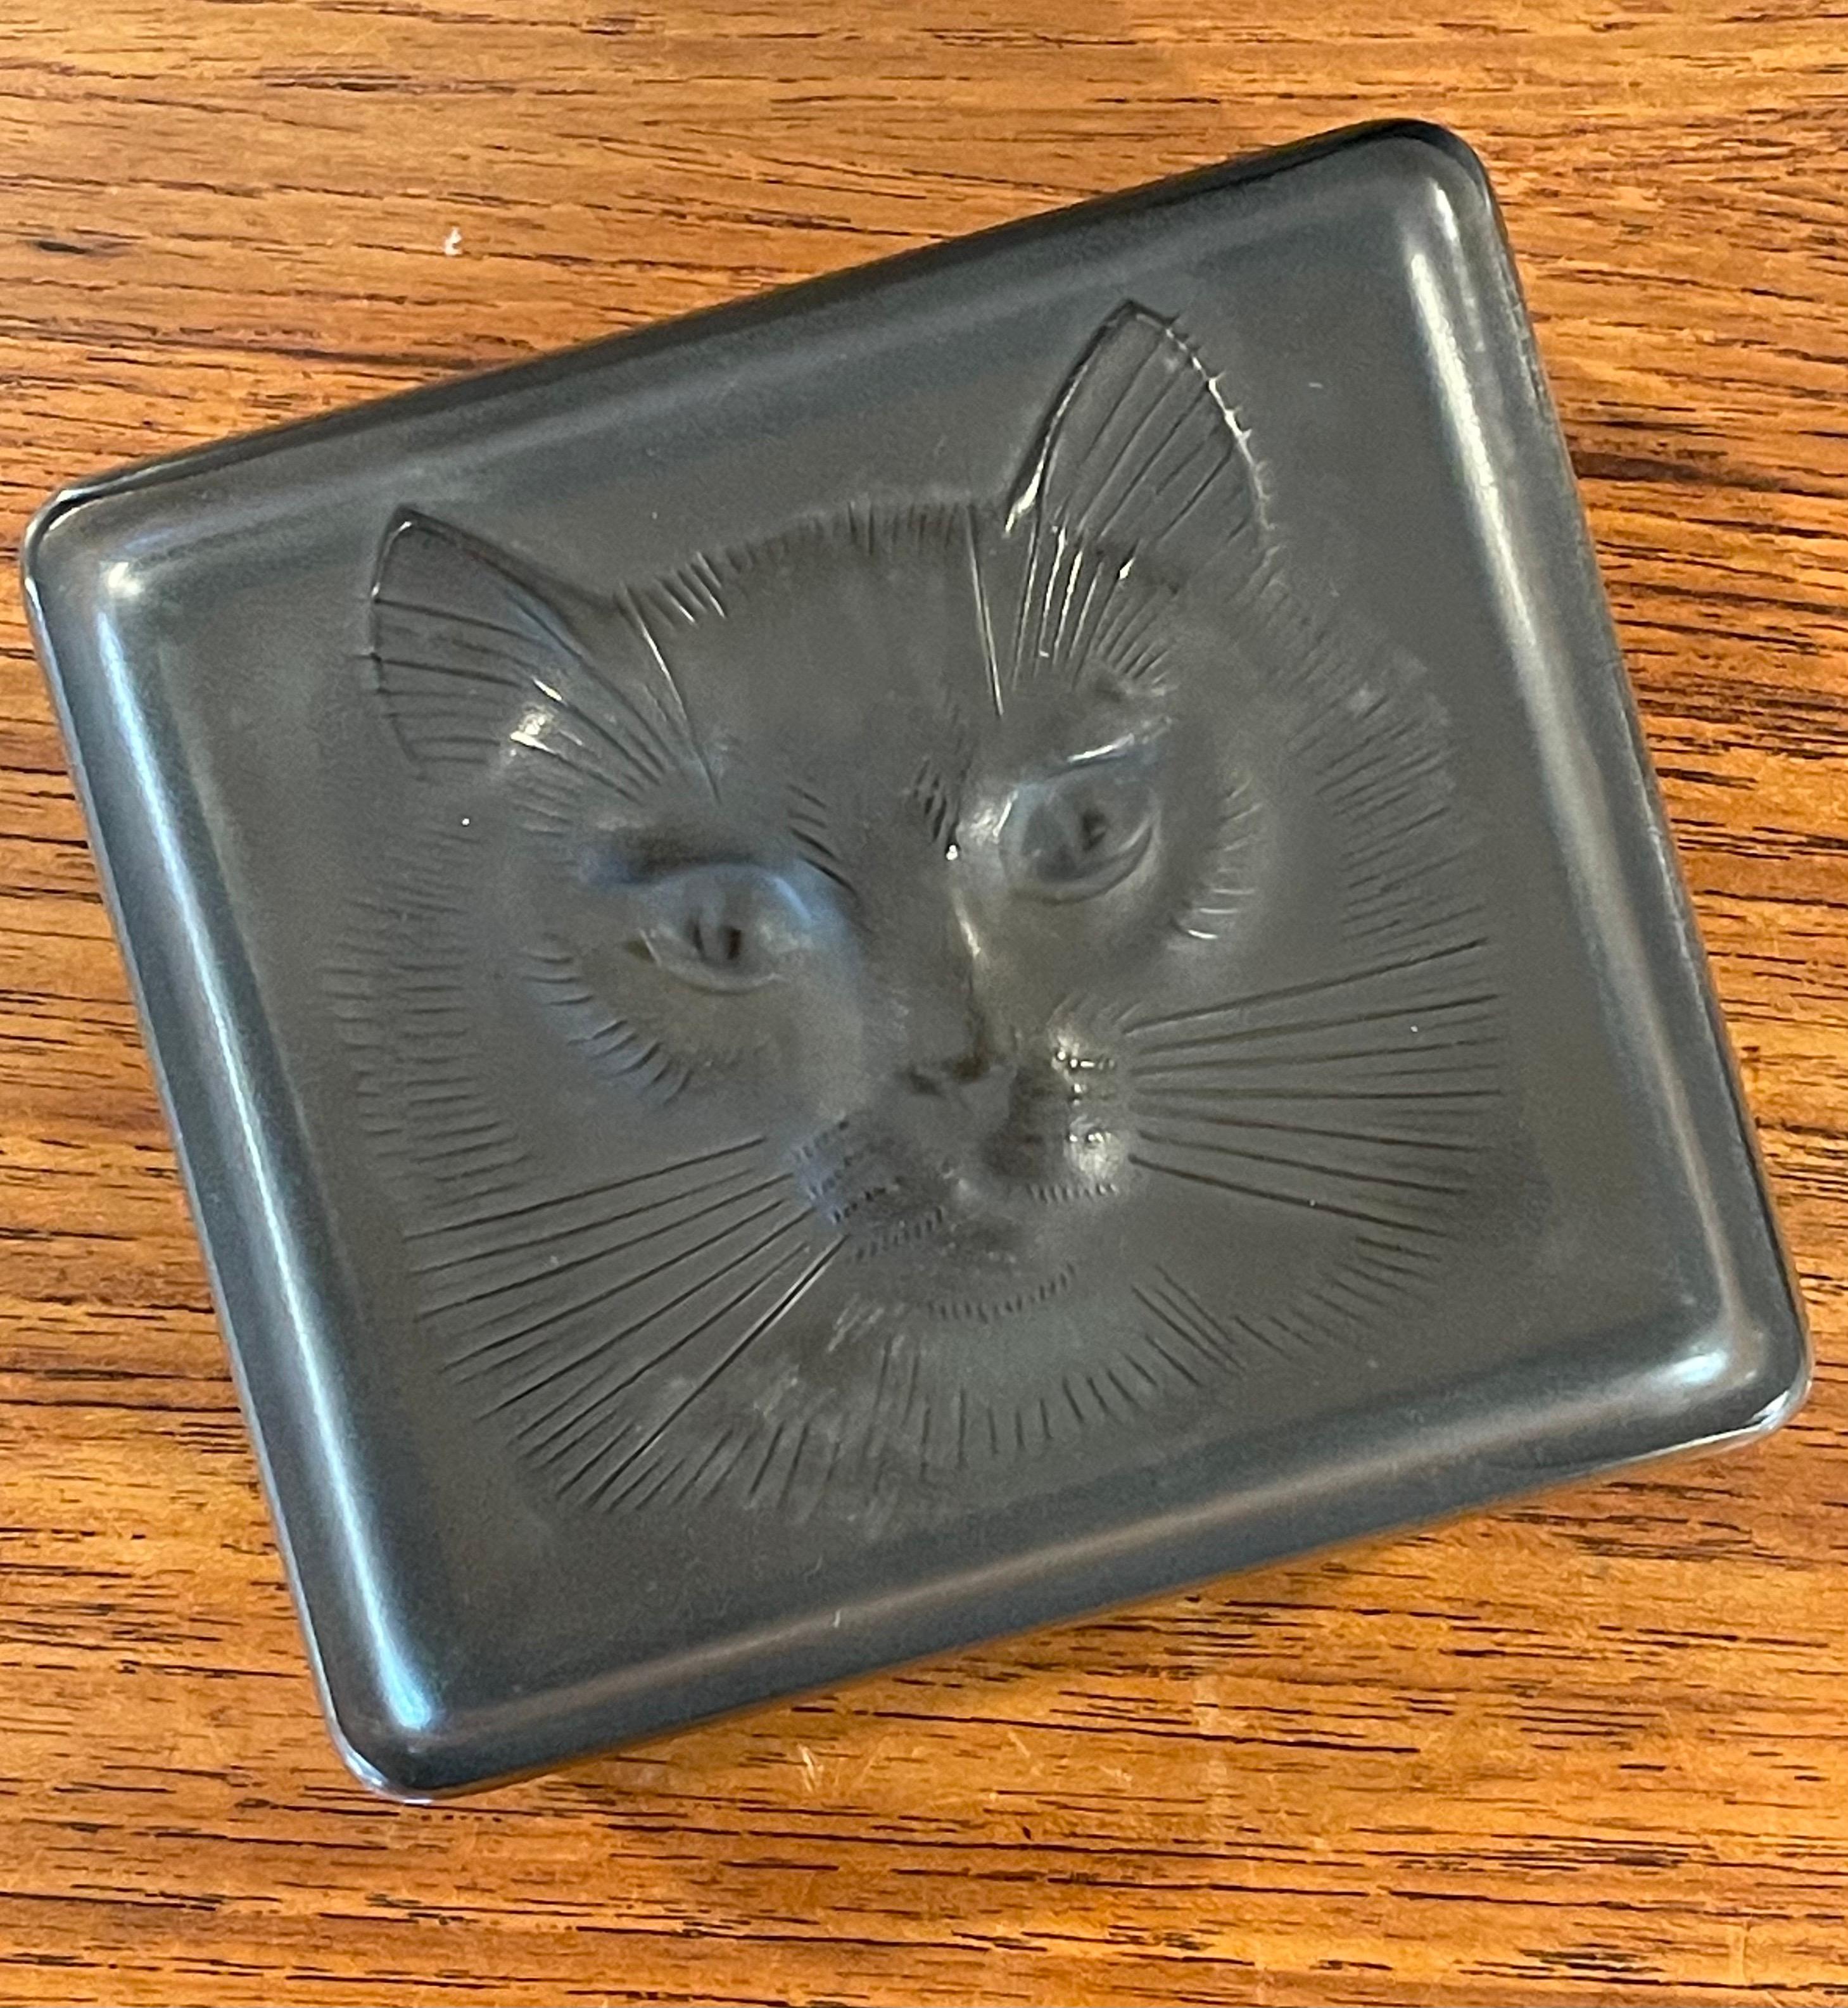 Gorgeous frosted grey crystal lidded box by Lalique of France, circa 1990s. The box has an embossed cat face on the lid and is in excellent vintage condition with no chips or cracks. The piece measures 4